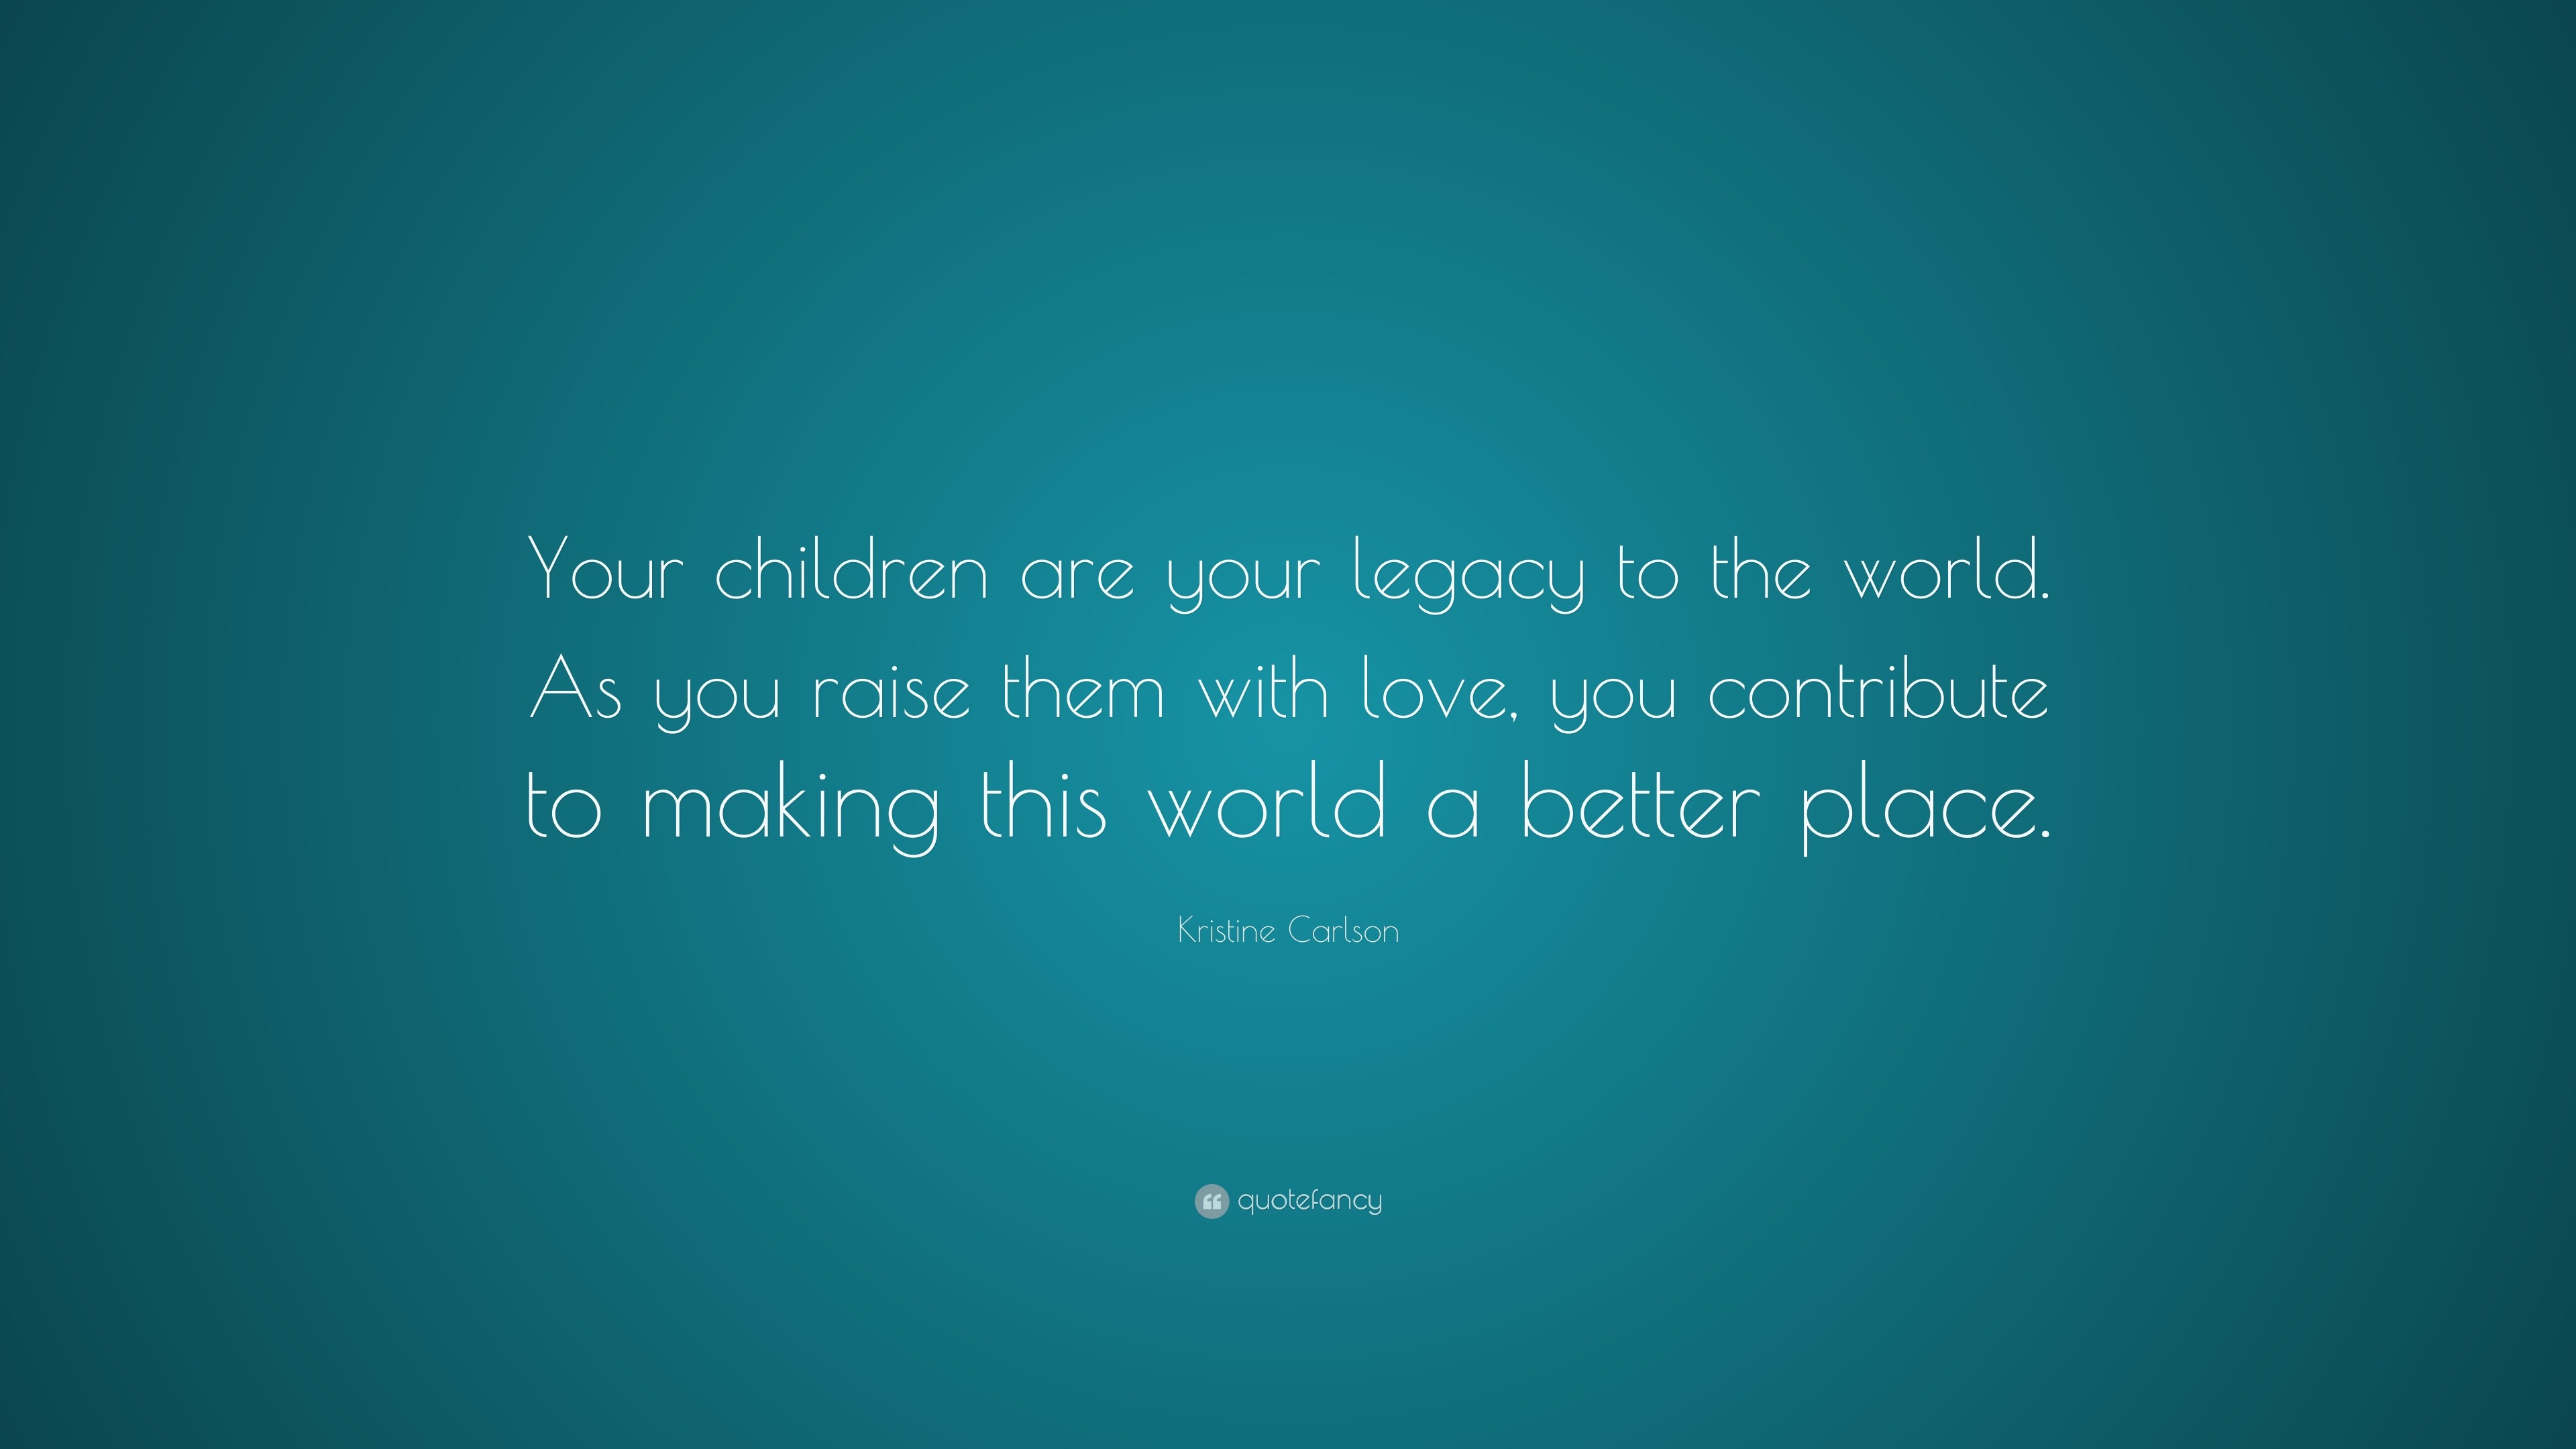 Kristine Carlson Quote: “Your children are your legacy to the